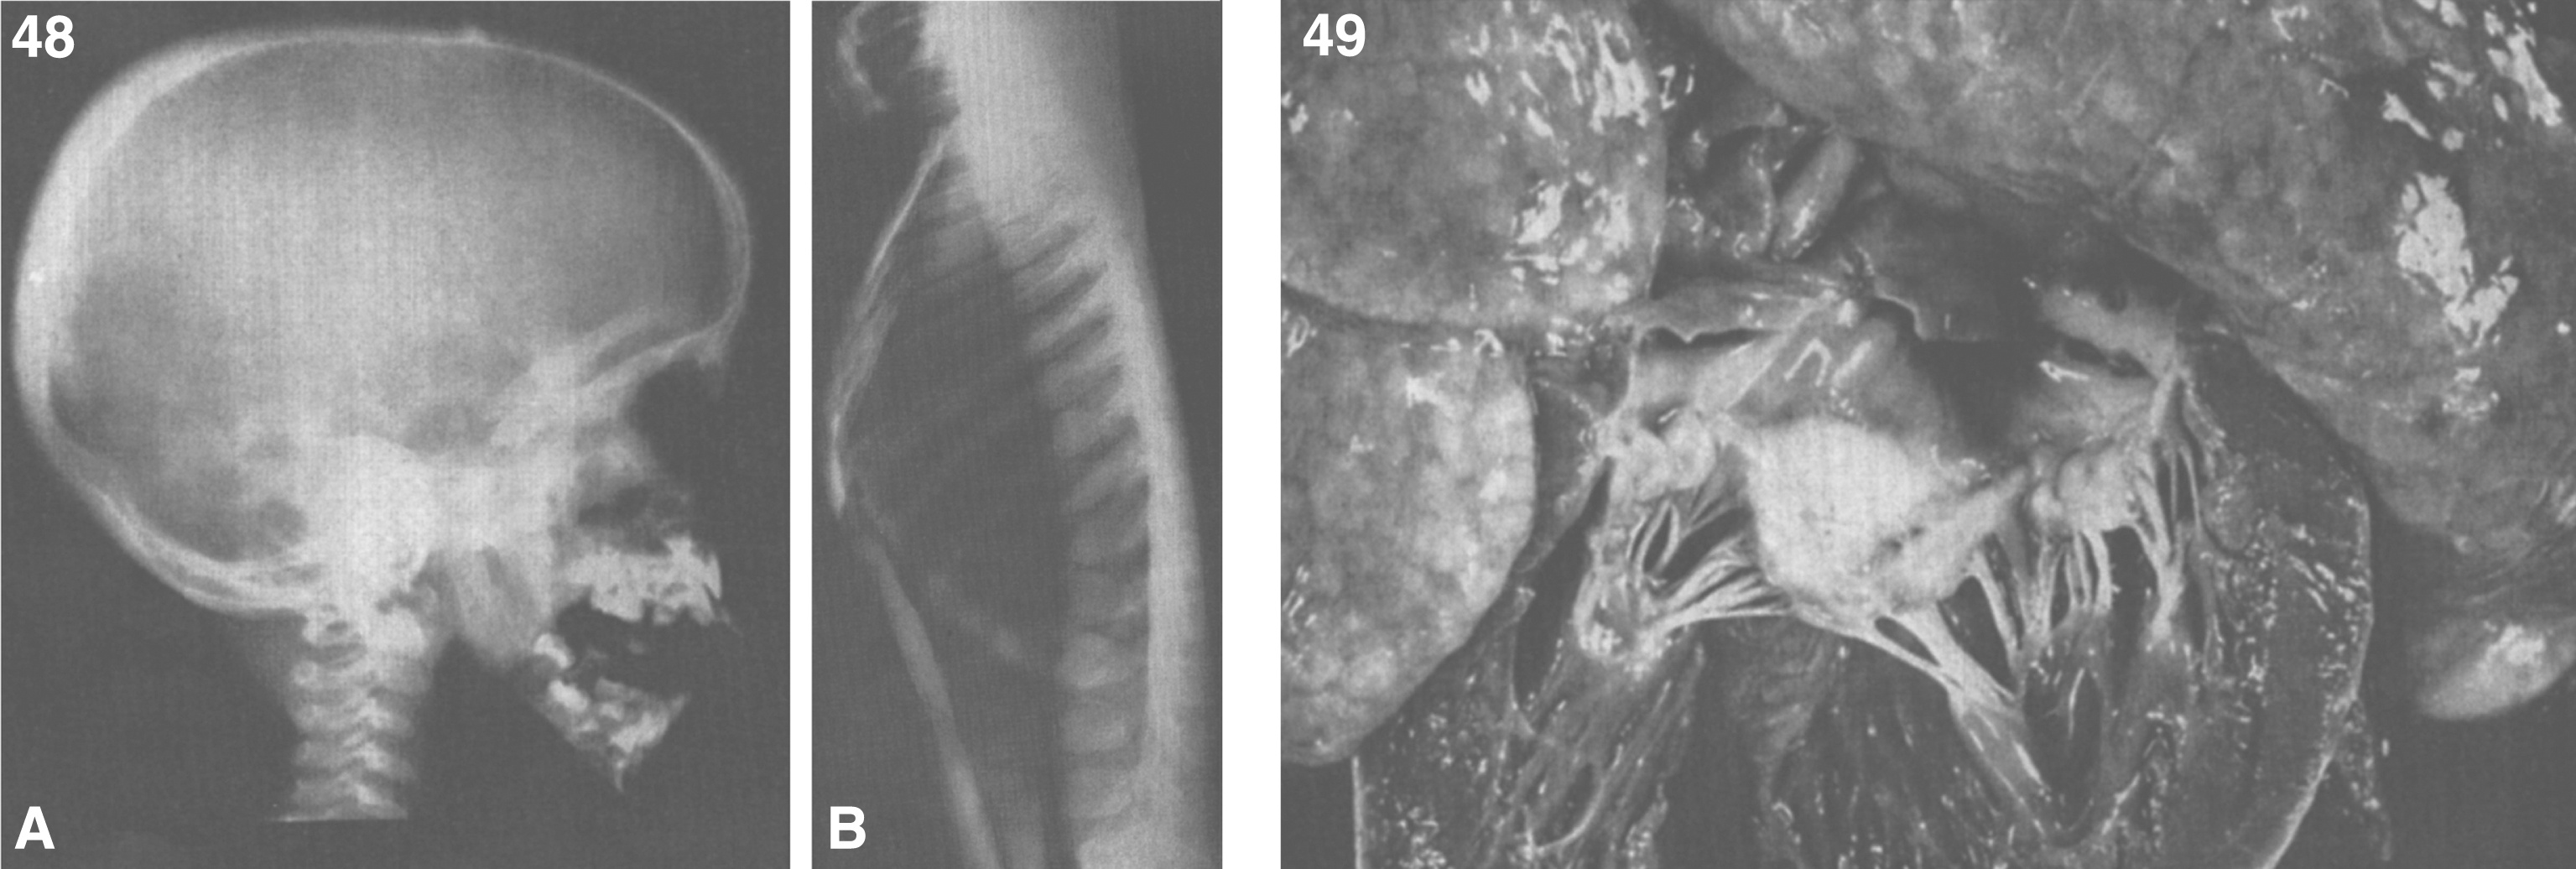 GM1 gangliosidosis type II. Postmortem X-ray. (A) Changes of dysostosis multiplex in skull. (B) Lateral projection of vertebrae that shows mild generalized platyspondyly of cervical vertebrae and tear-drop deformity of vertebrae; (49) GM1 gangliosidosis type II. Gross appearance of heart opened through the left ventricle. The mitral valve leaflets are markedly deformed and thickended.